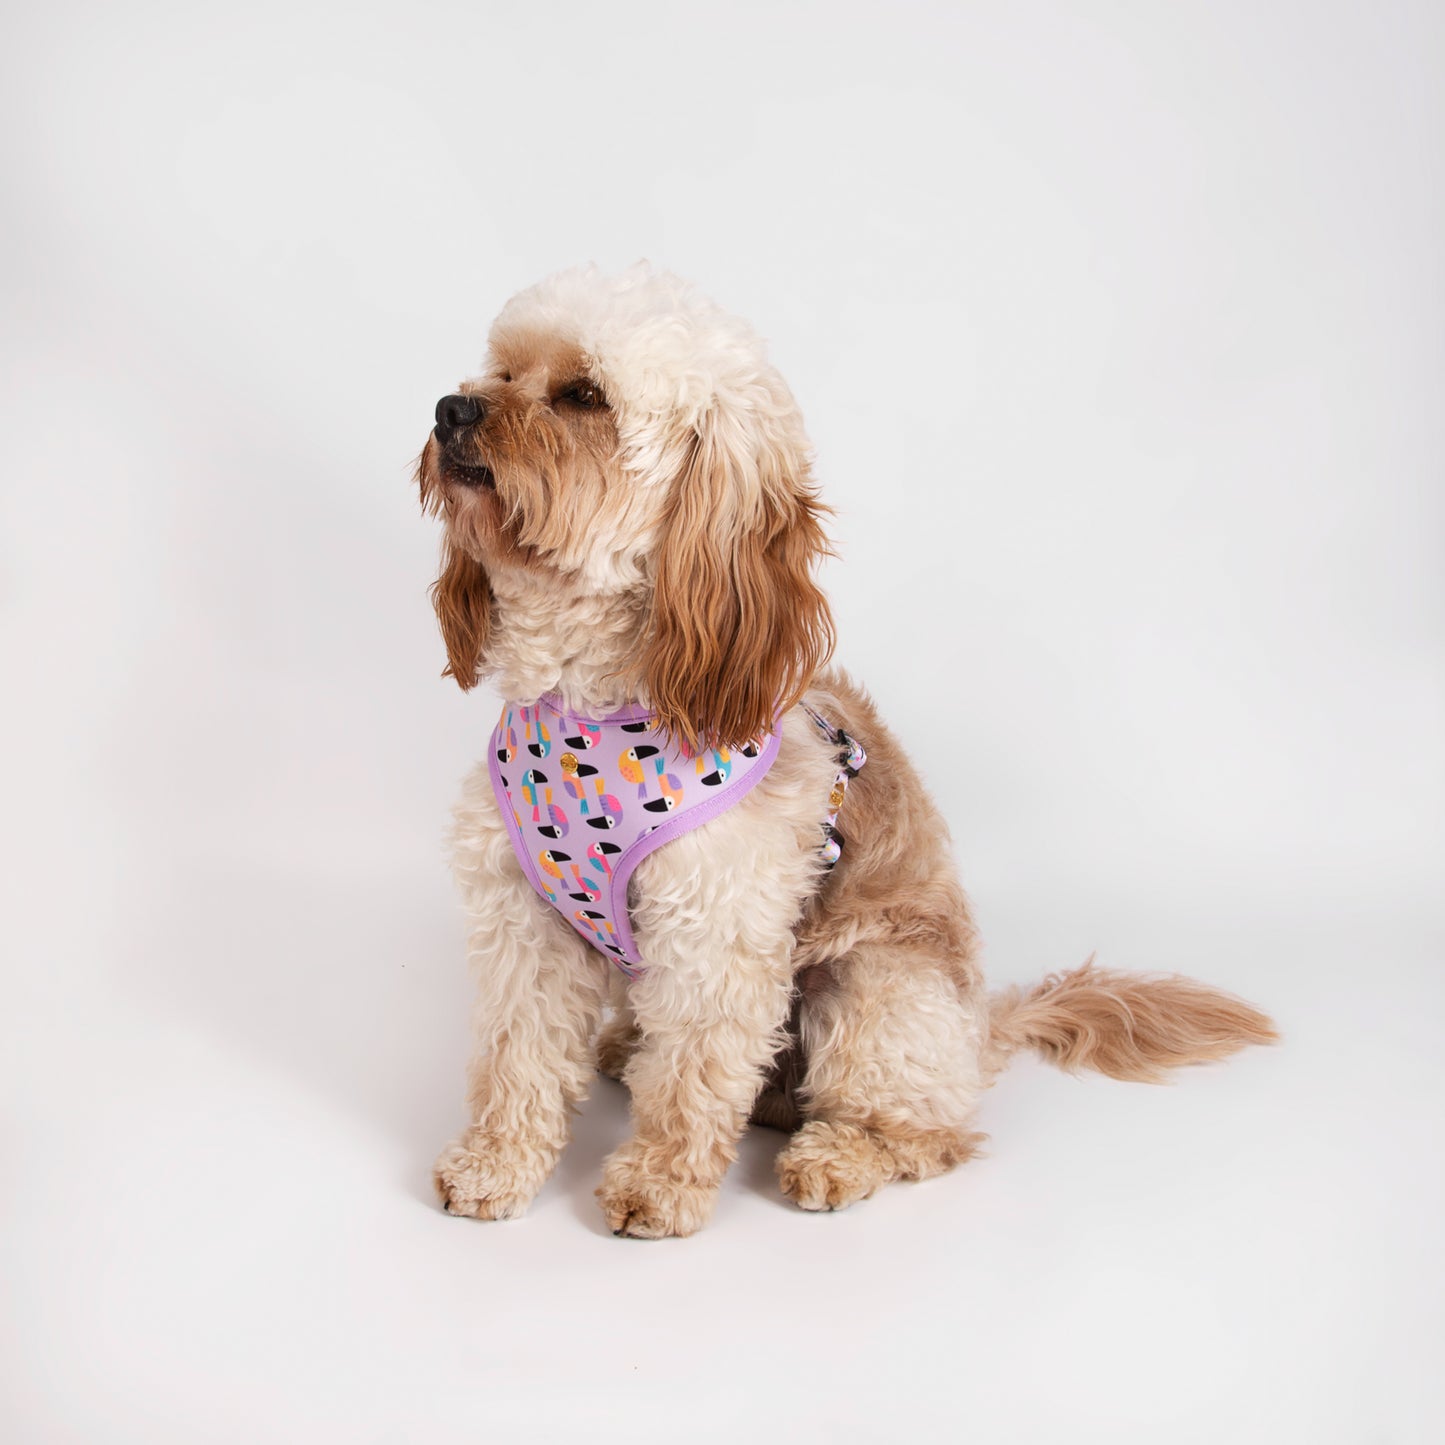 Pata Paw toucan tropics harness as seen in a medium-sized dog.